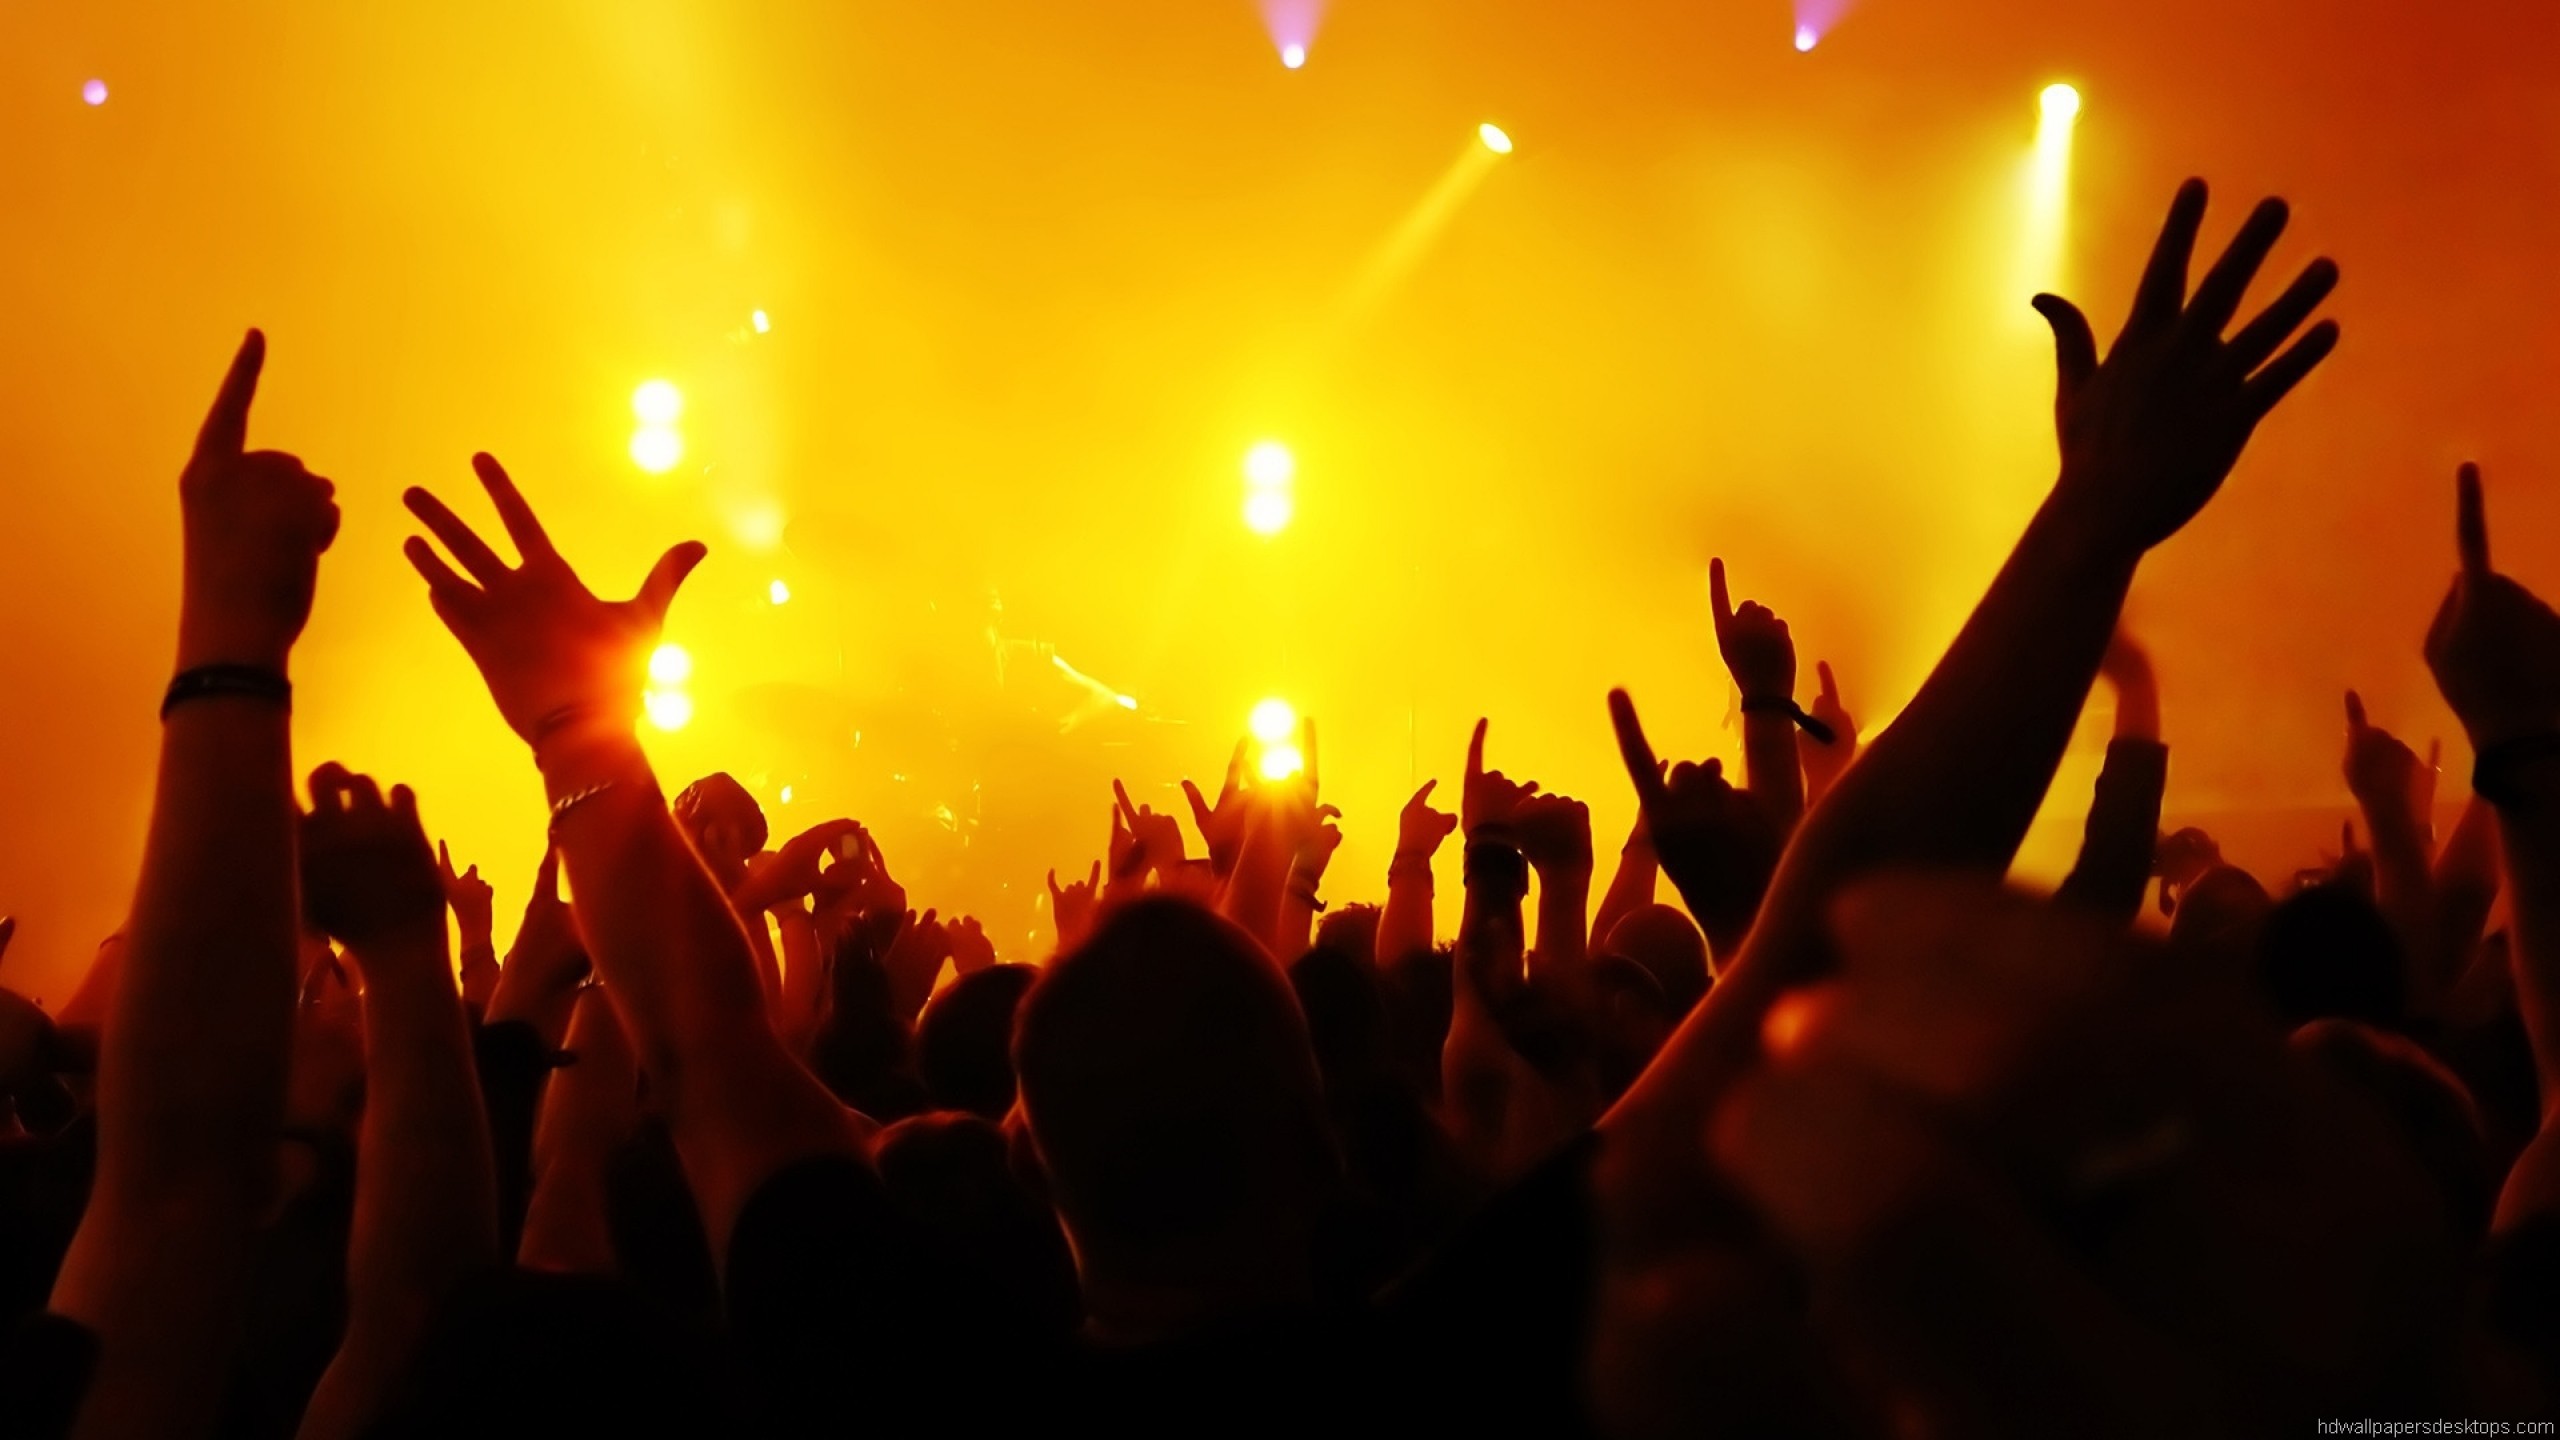 General 2560x1440 concerts music crowds arms up lights